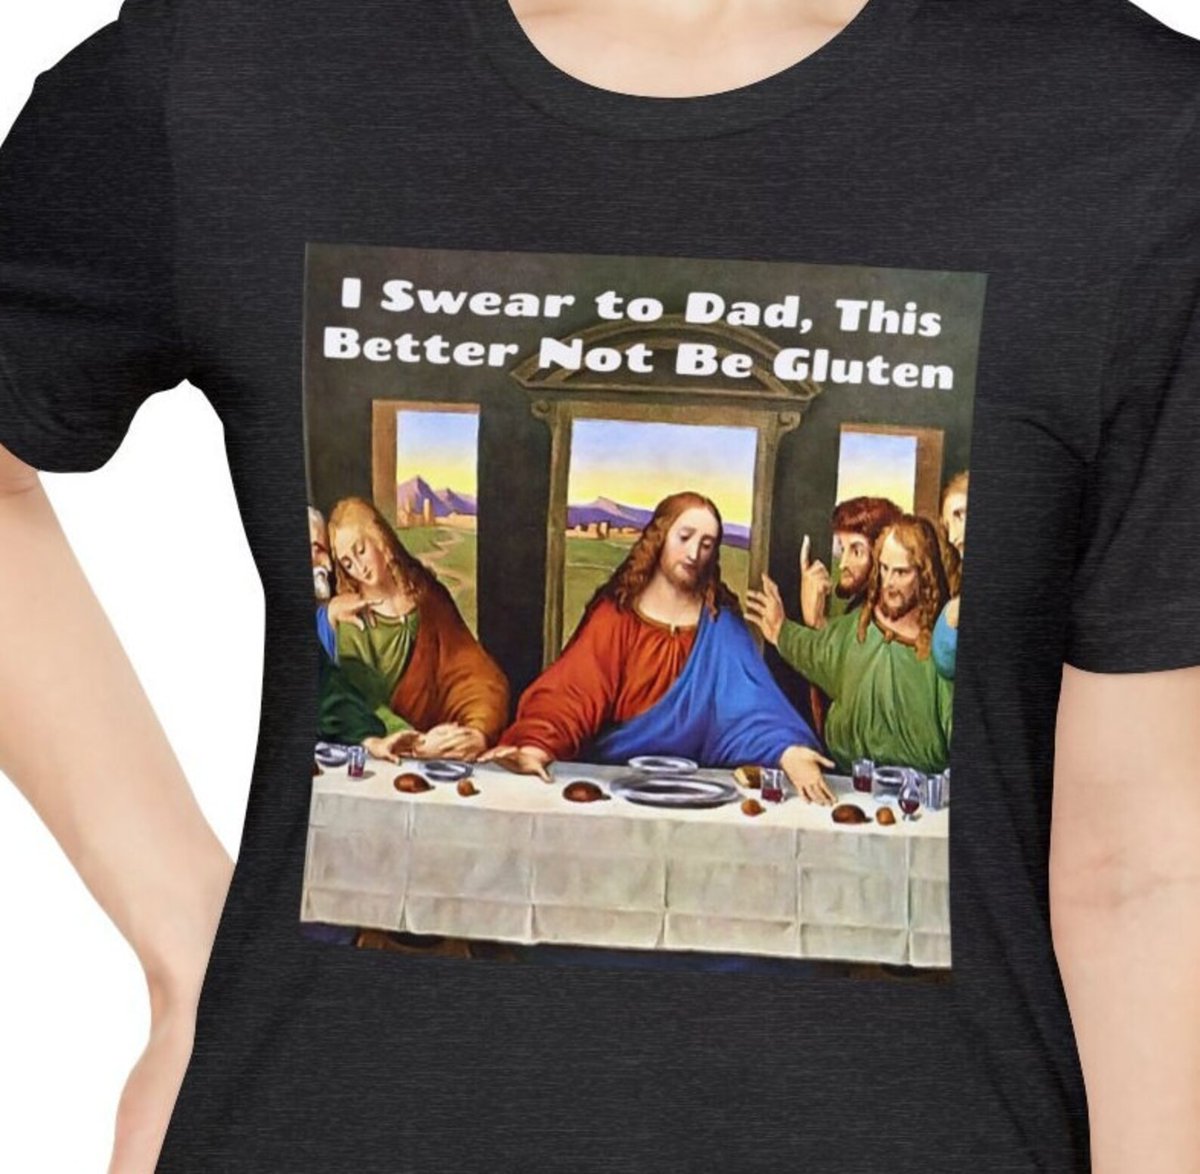 New T-shirt 'I Swear to Dad, This Better Not Be Gluten' #funnytshirts #glutenfree
[ on Etsy: tinyurl.com/mut9ch52 ]